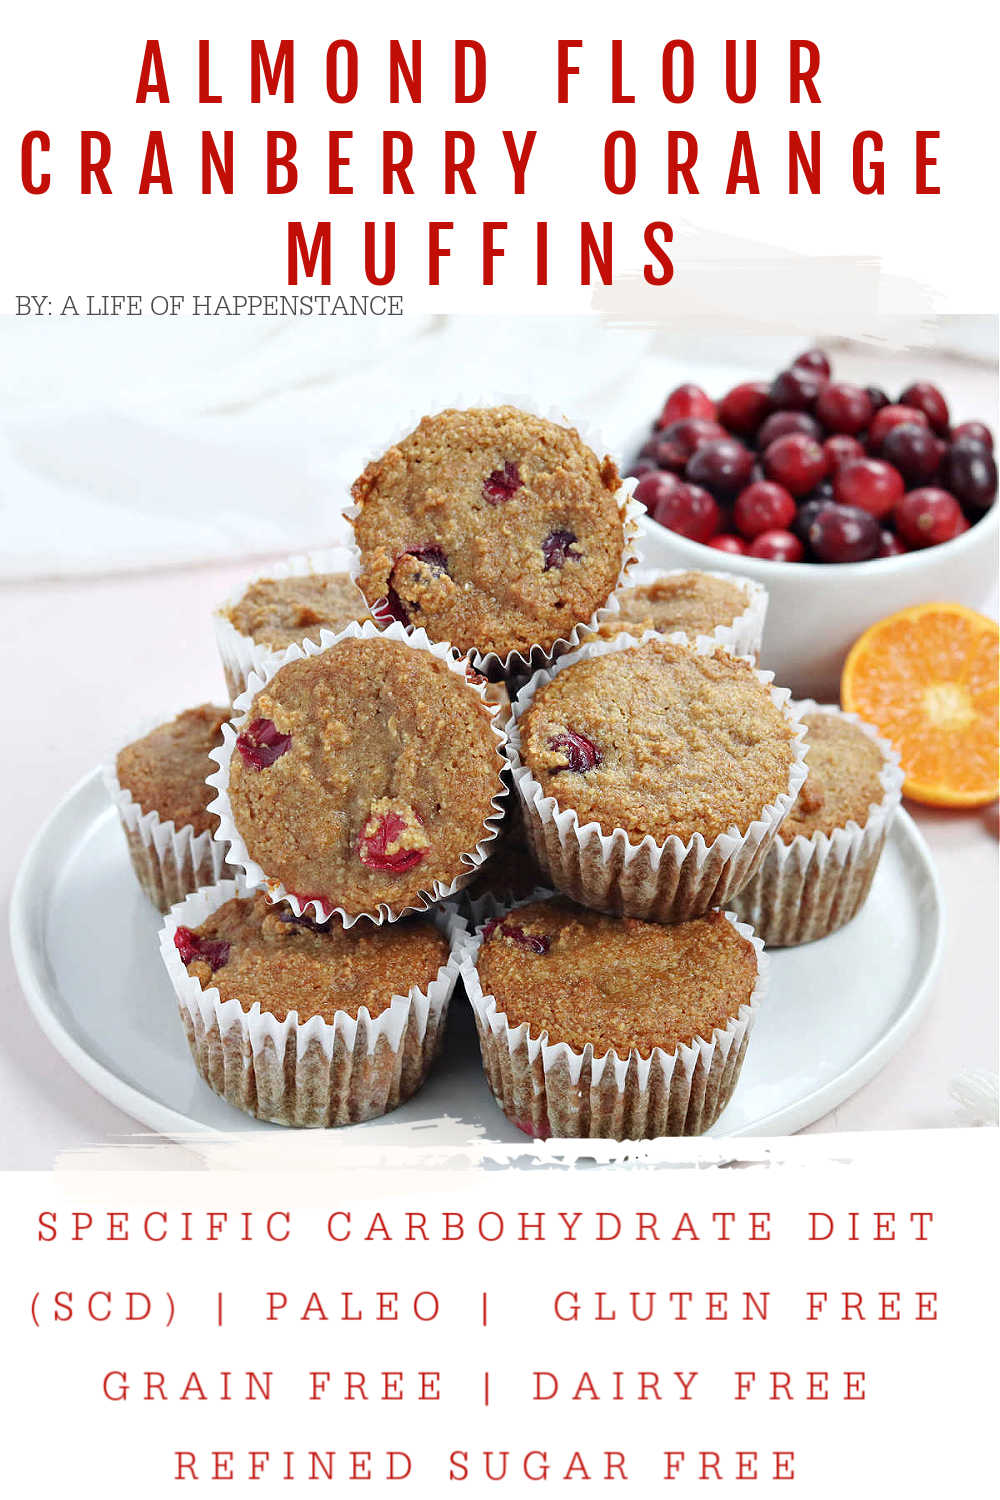 These almond flour cranberry orange muffins are sweet, tart, and make for a perfect breakfast or snack! These SCD muffins are also paleo, gluten free, grain free, dairy free, and refined sugar free.